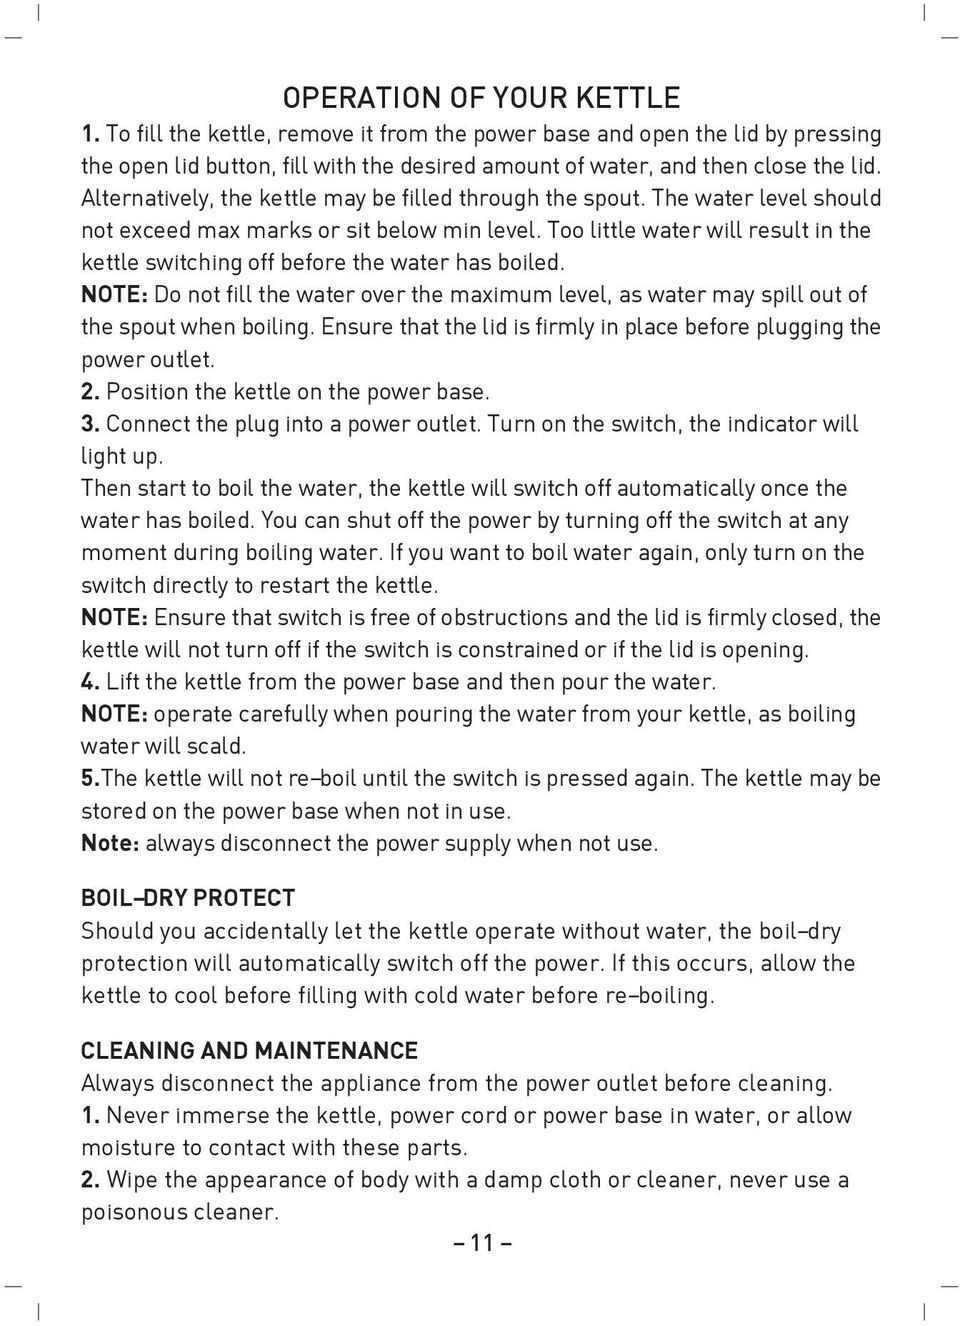 Too little water will result in the kettle switching off before the water has boiled. NOTE: Do not fill the water over the maximum level, as water may spill out of the spout when boiling.